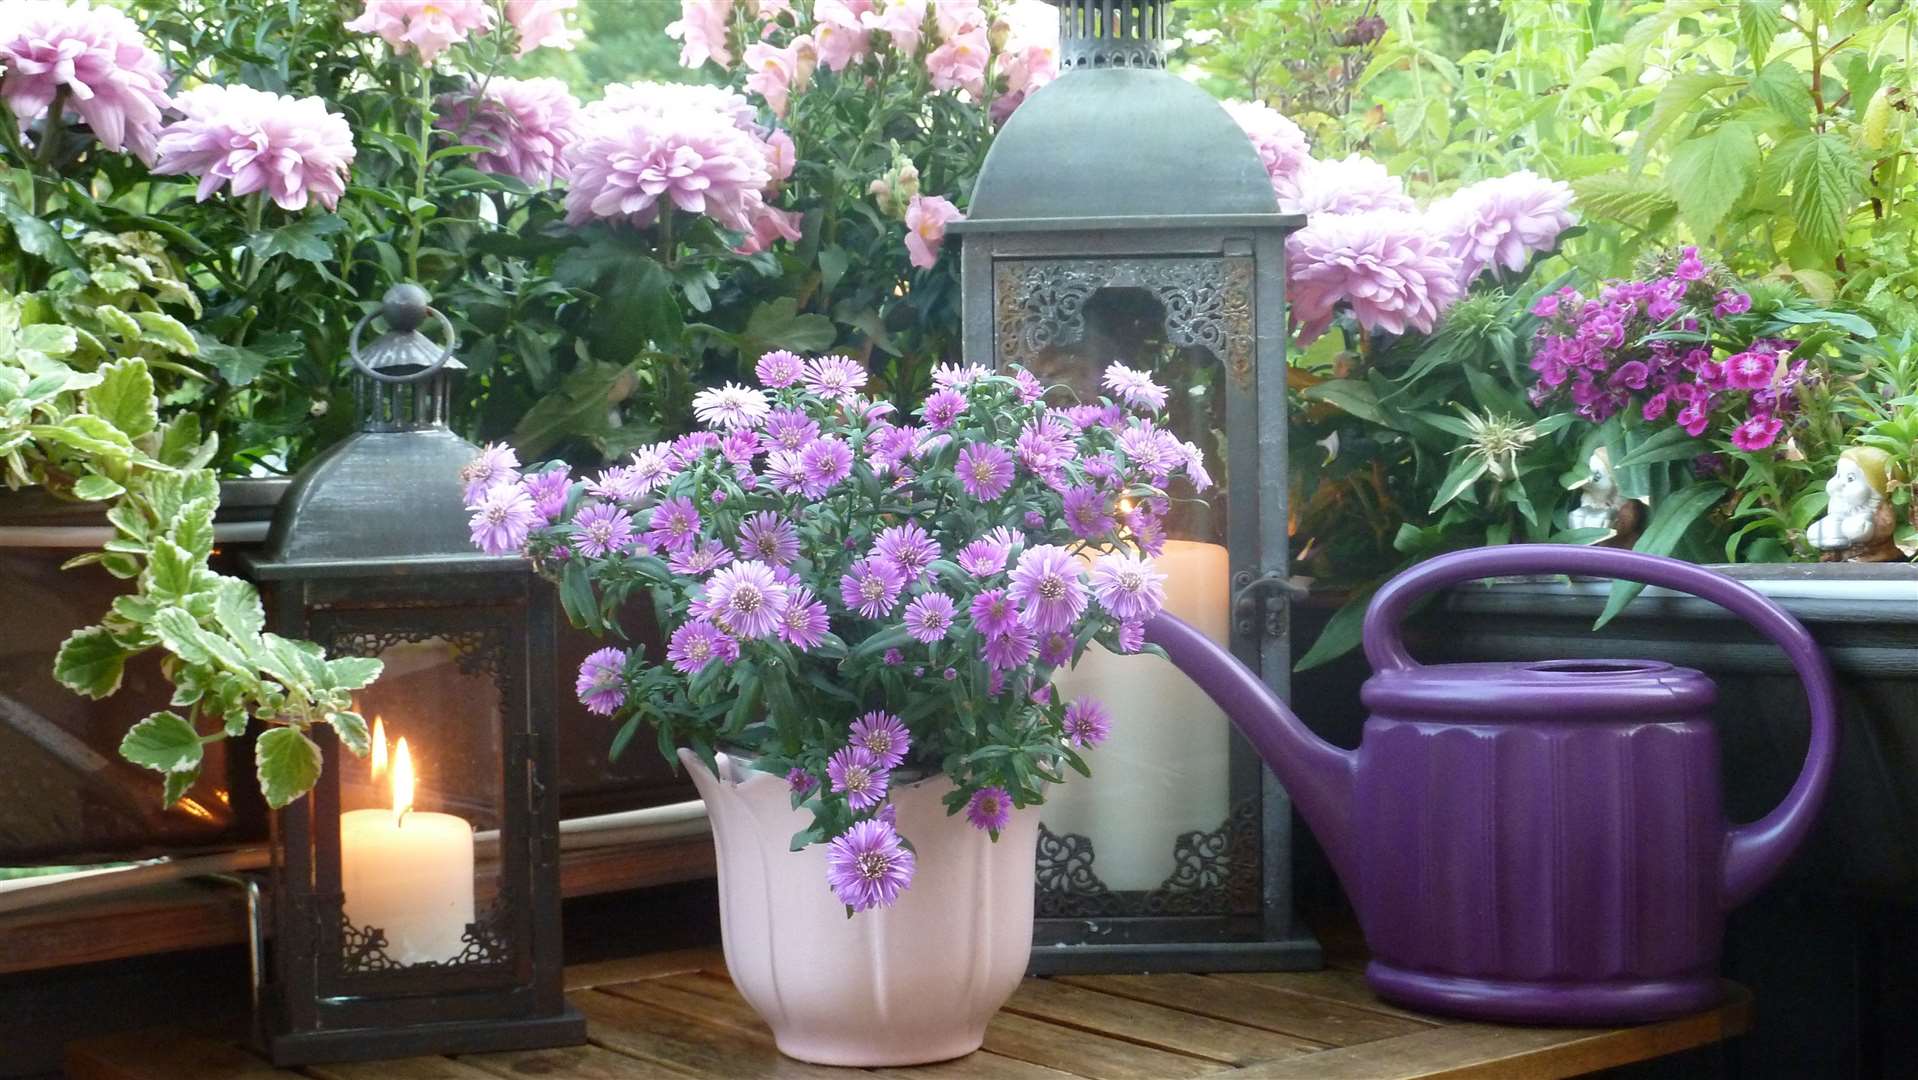 Extend your colour theme to include ornaments and garden furniture as well as plants and flowers.